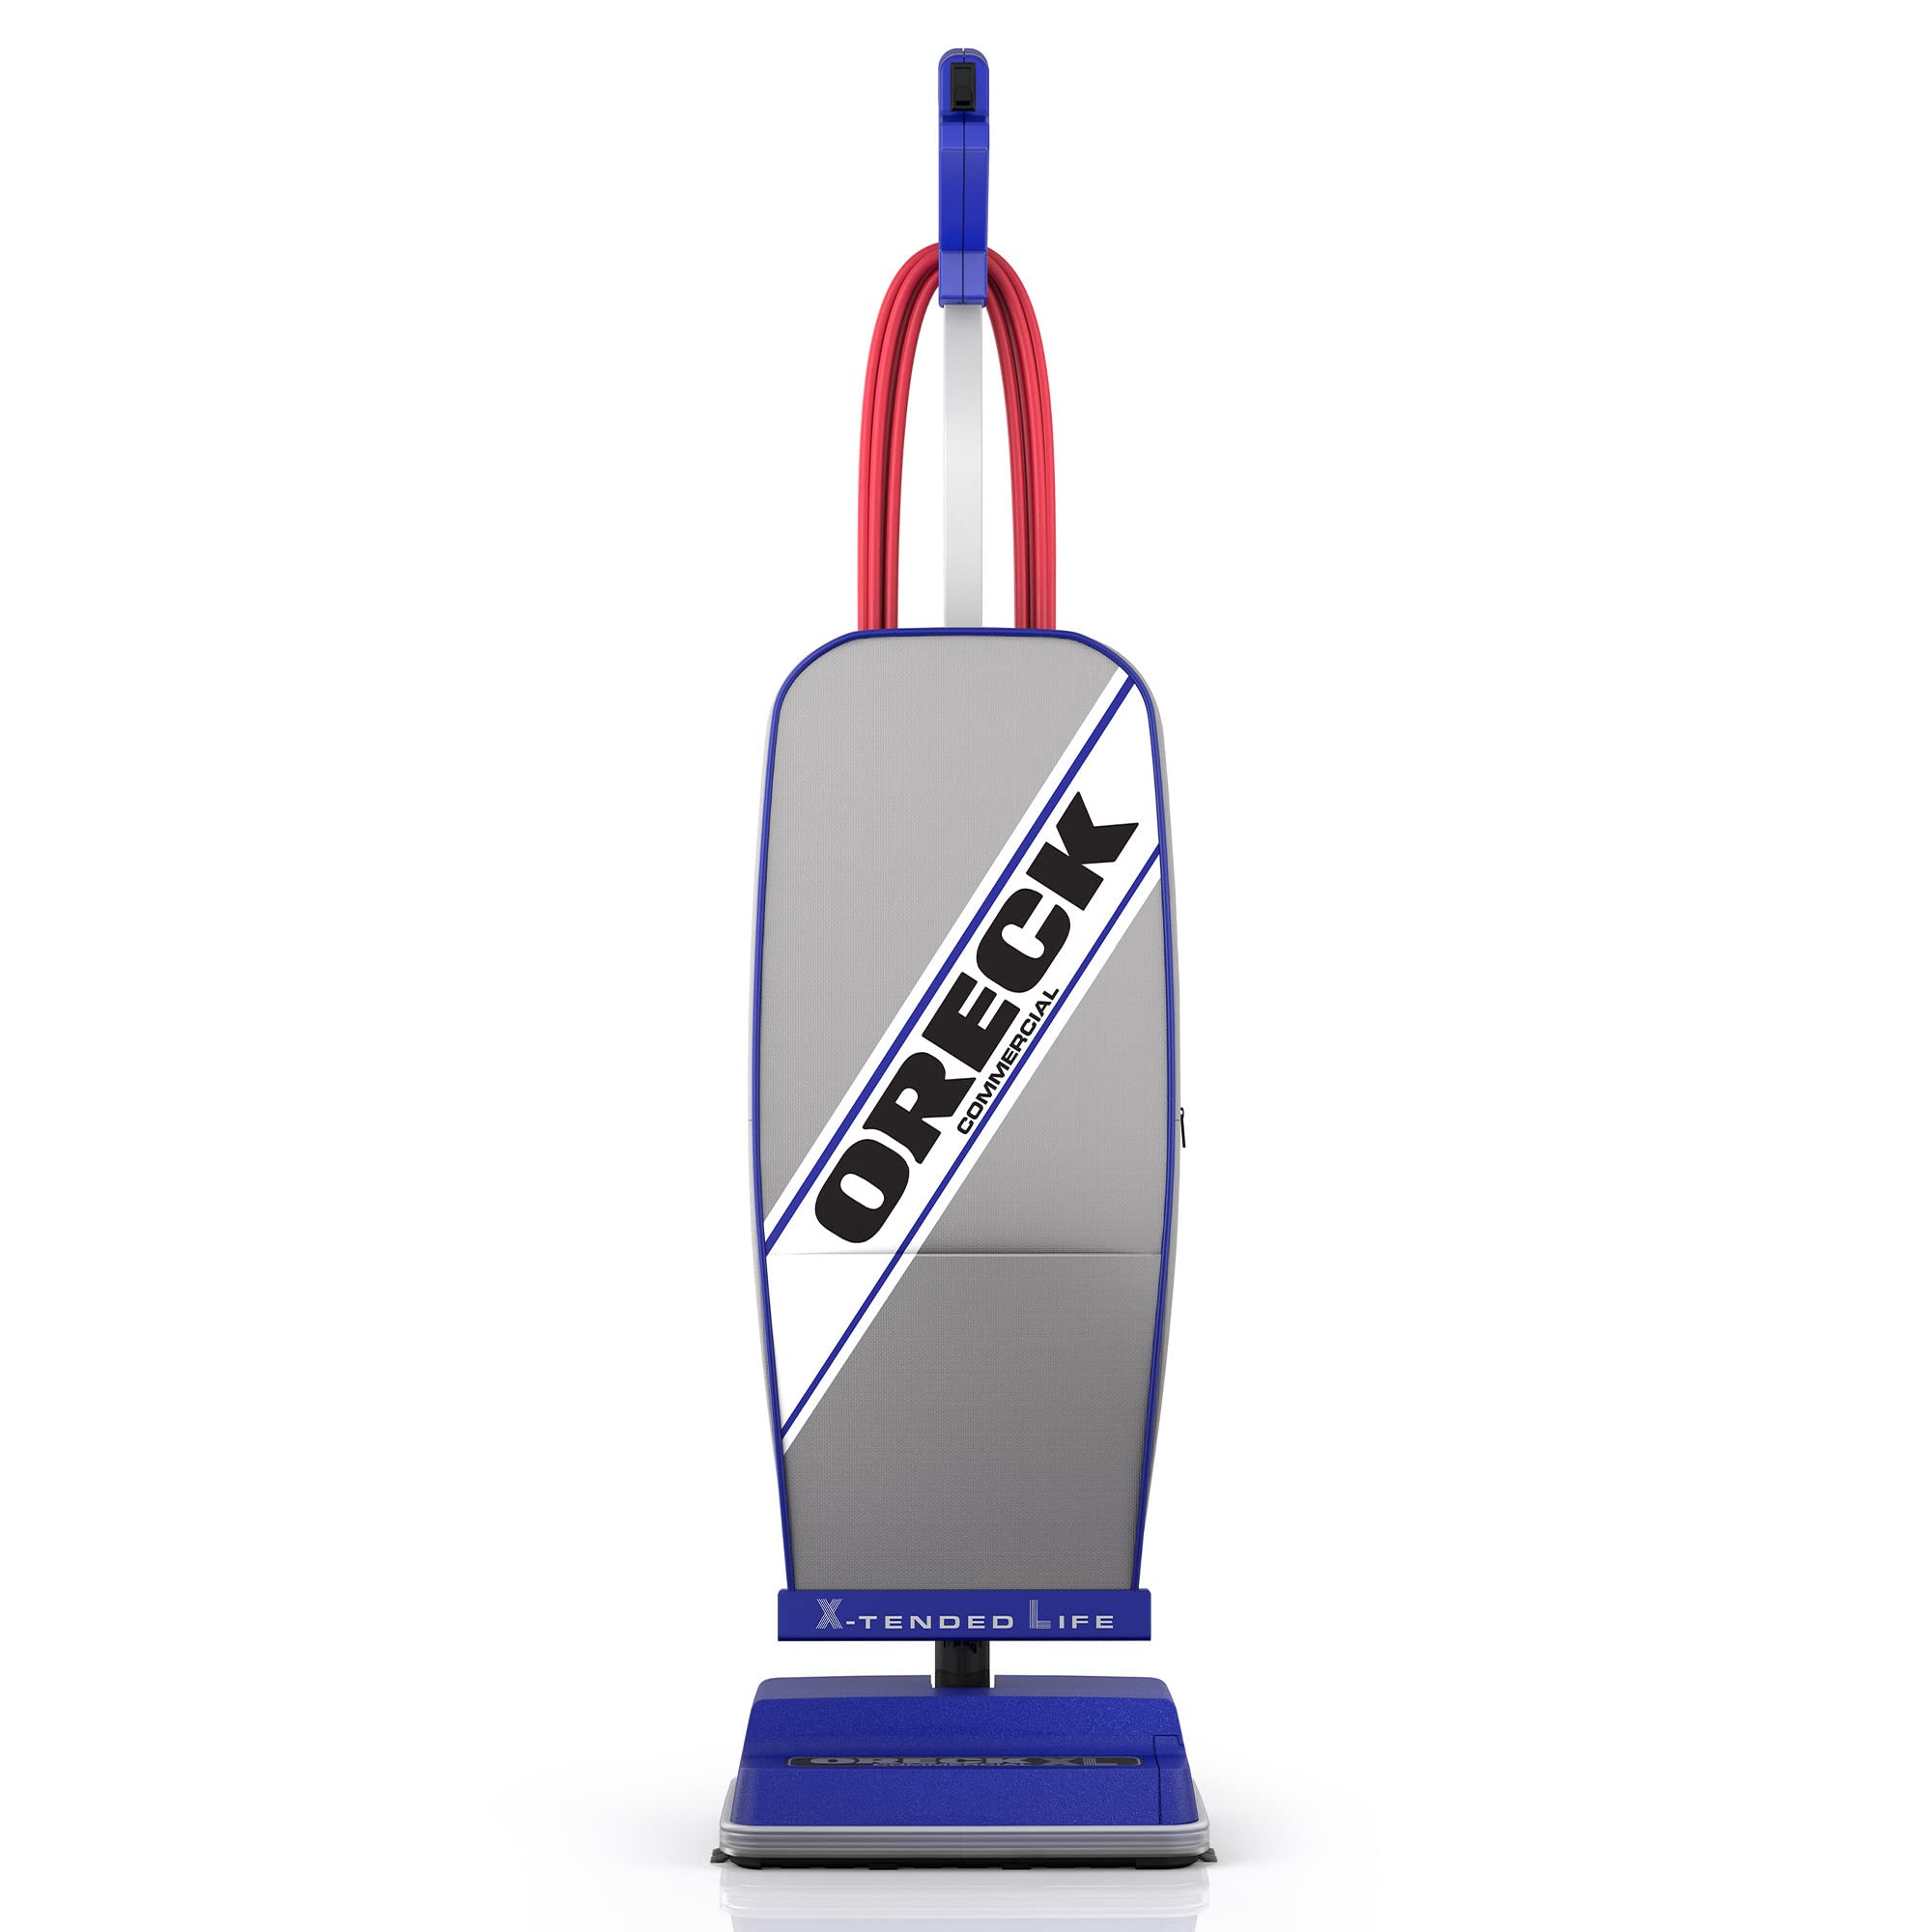 ORECK XL COMMERCIAL Upright Vacuum Cleaner